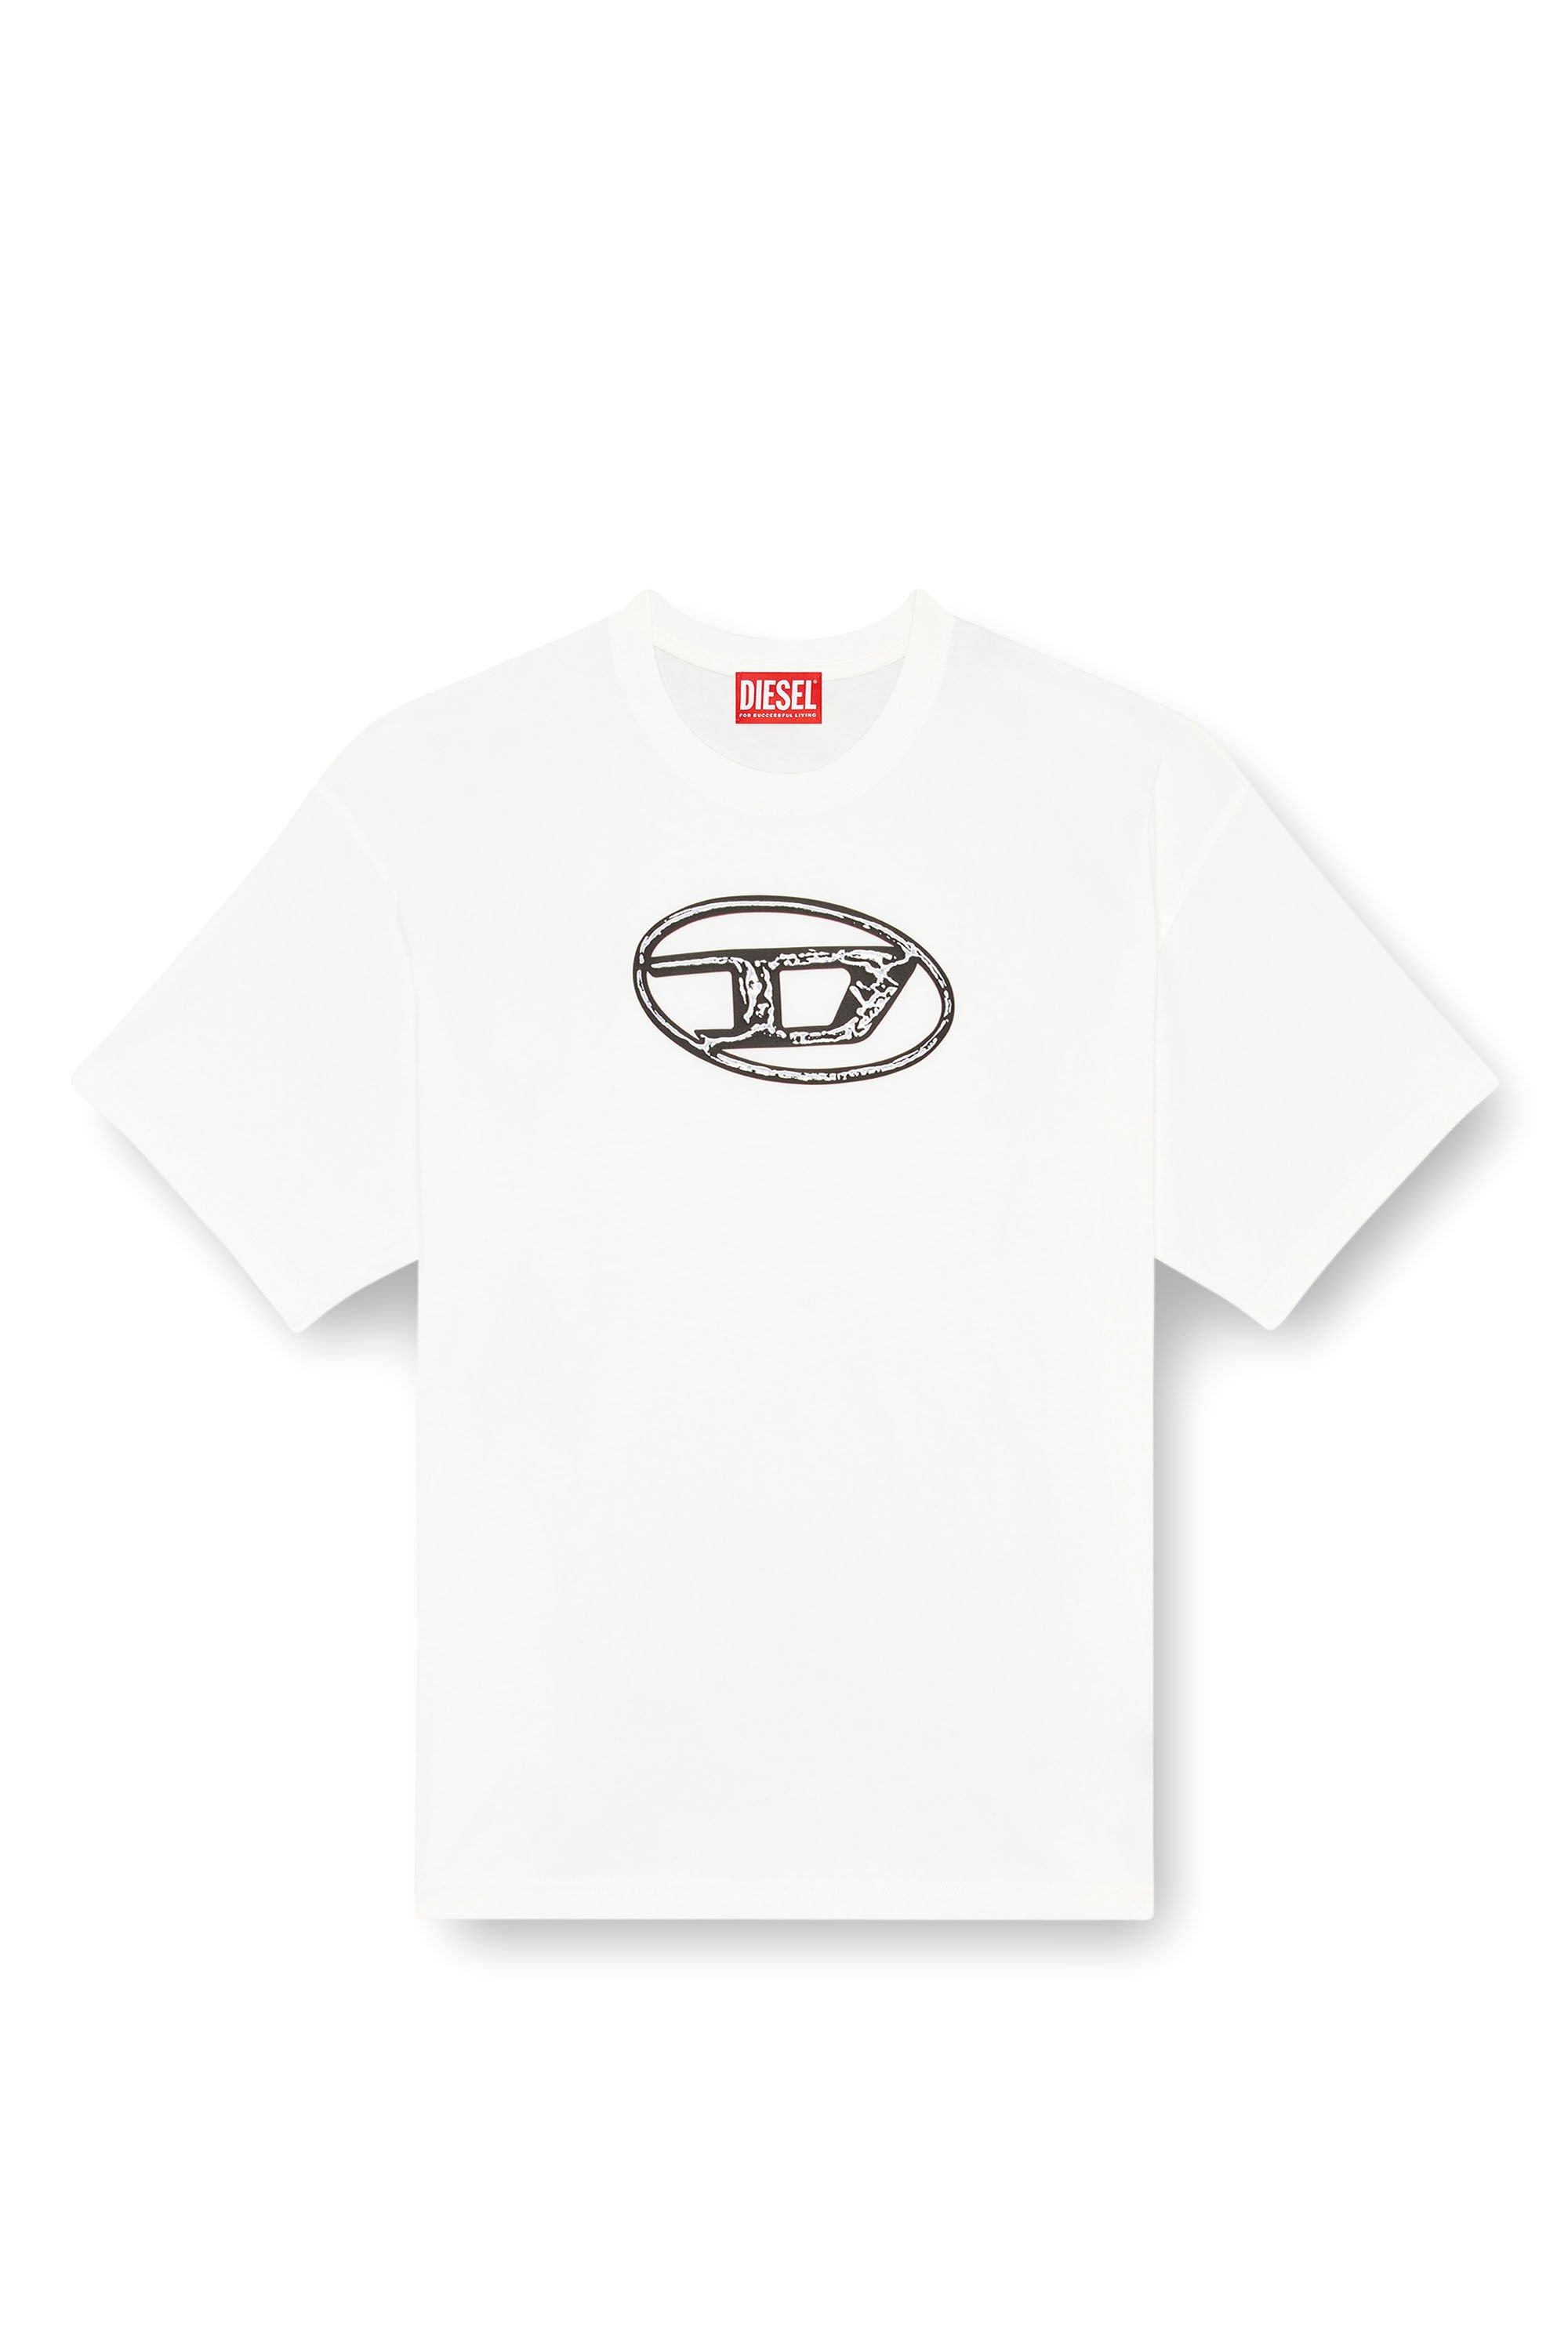 Diesel - T-BOXT-Q22, Man Faded T-shirt with Oval D print in White - Image 2